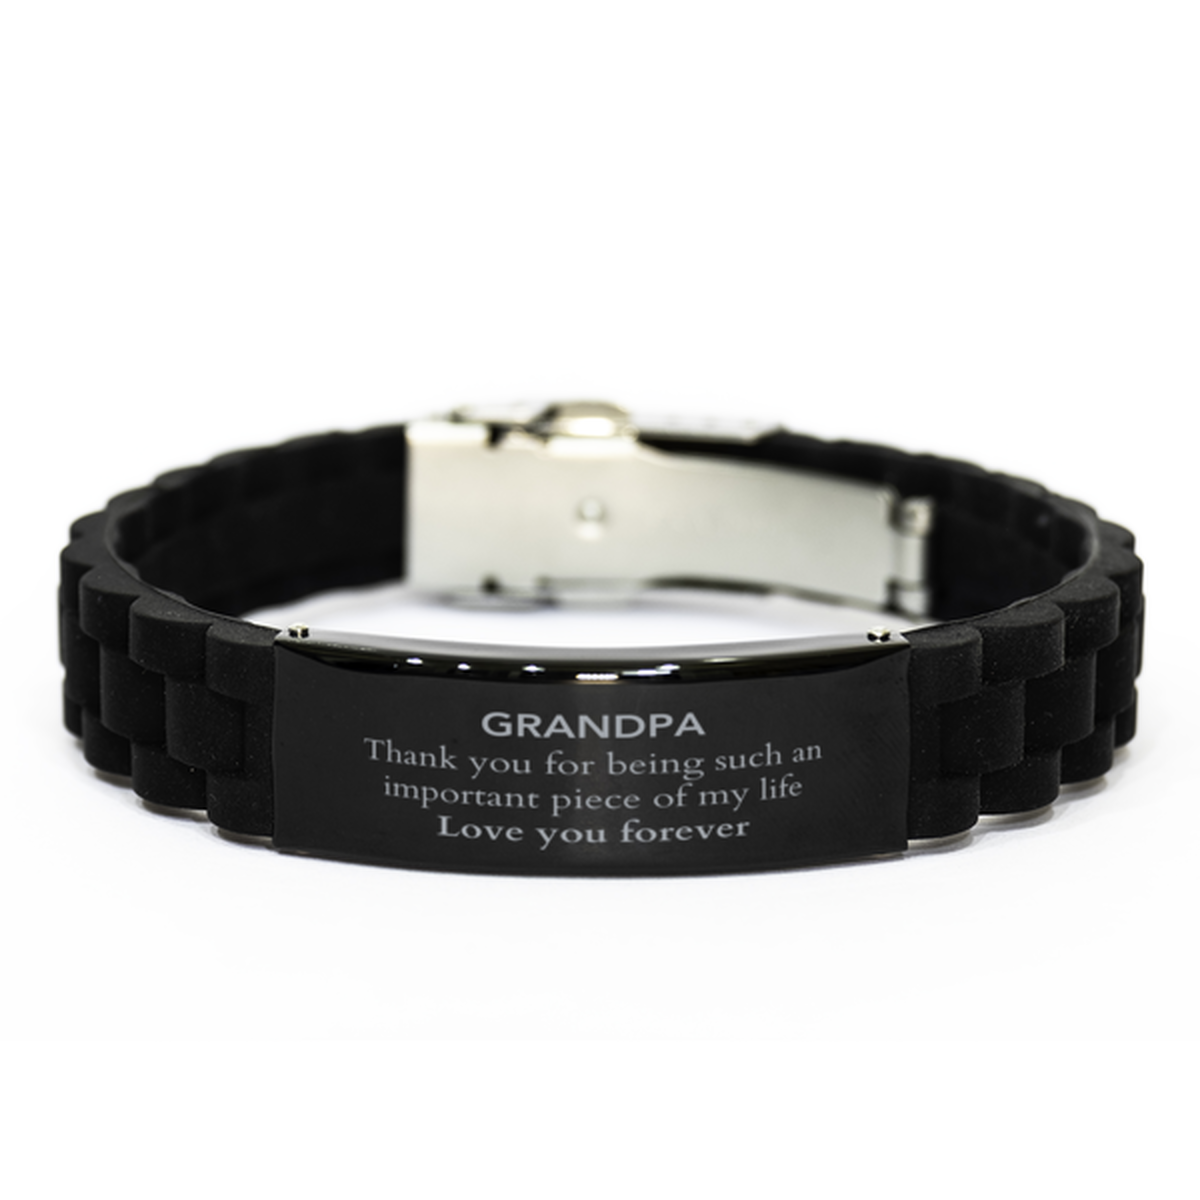 Appropriate Grandpa Black Glidelock Clasp Bracelet Epic Birthday Gifts for Grandpa Thank you for being such an important piece of my life Grandpa Christmas Mothers Fathers Day